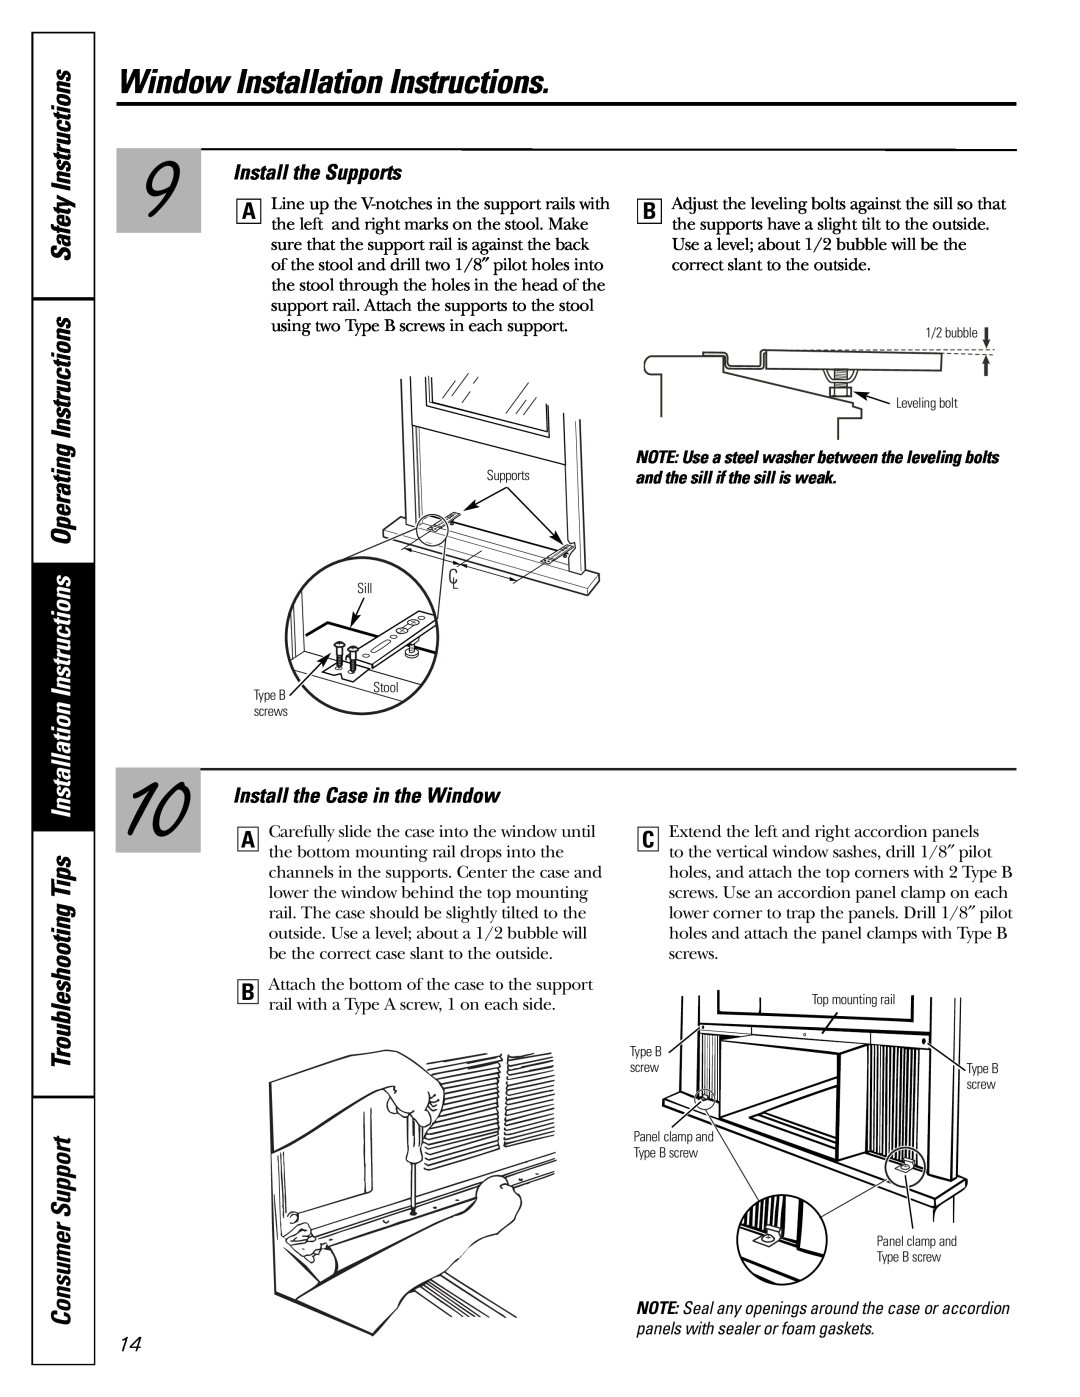 GE AKV05, AKS05 Operating Instructions Safety, Support Troubleshooting Tips Installation, Consumer, Install the Supports 